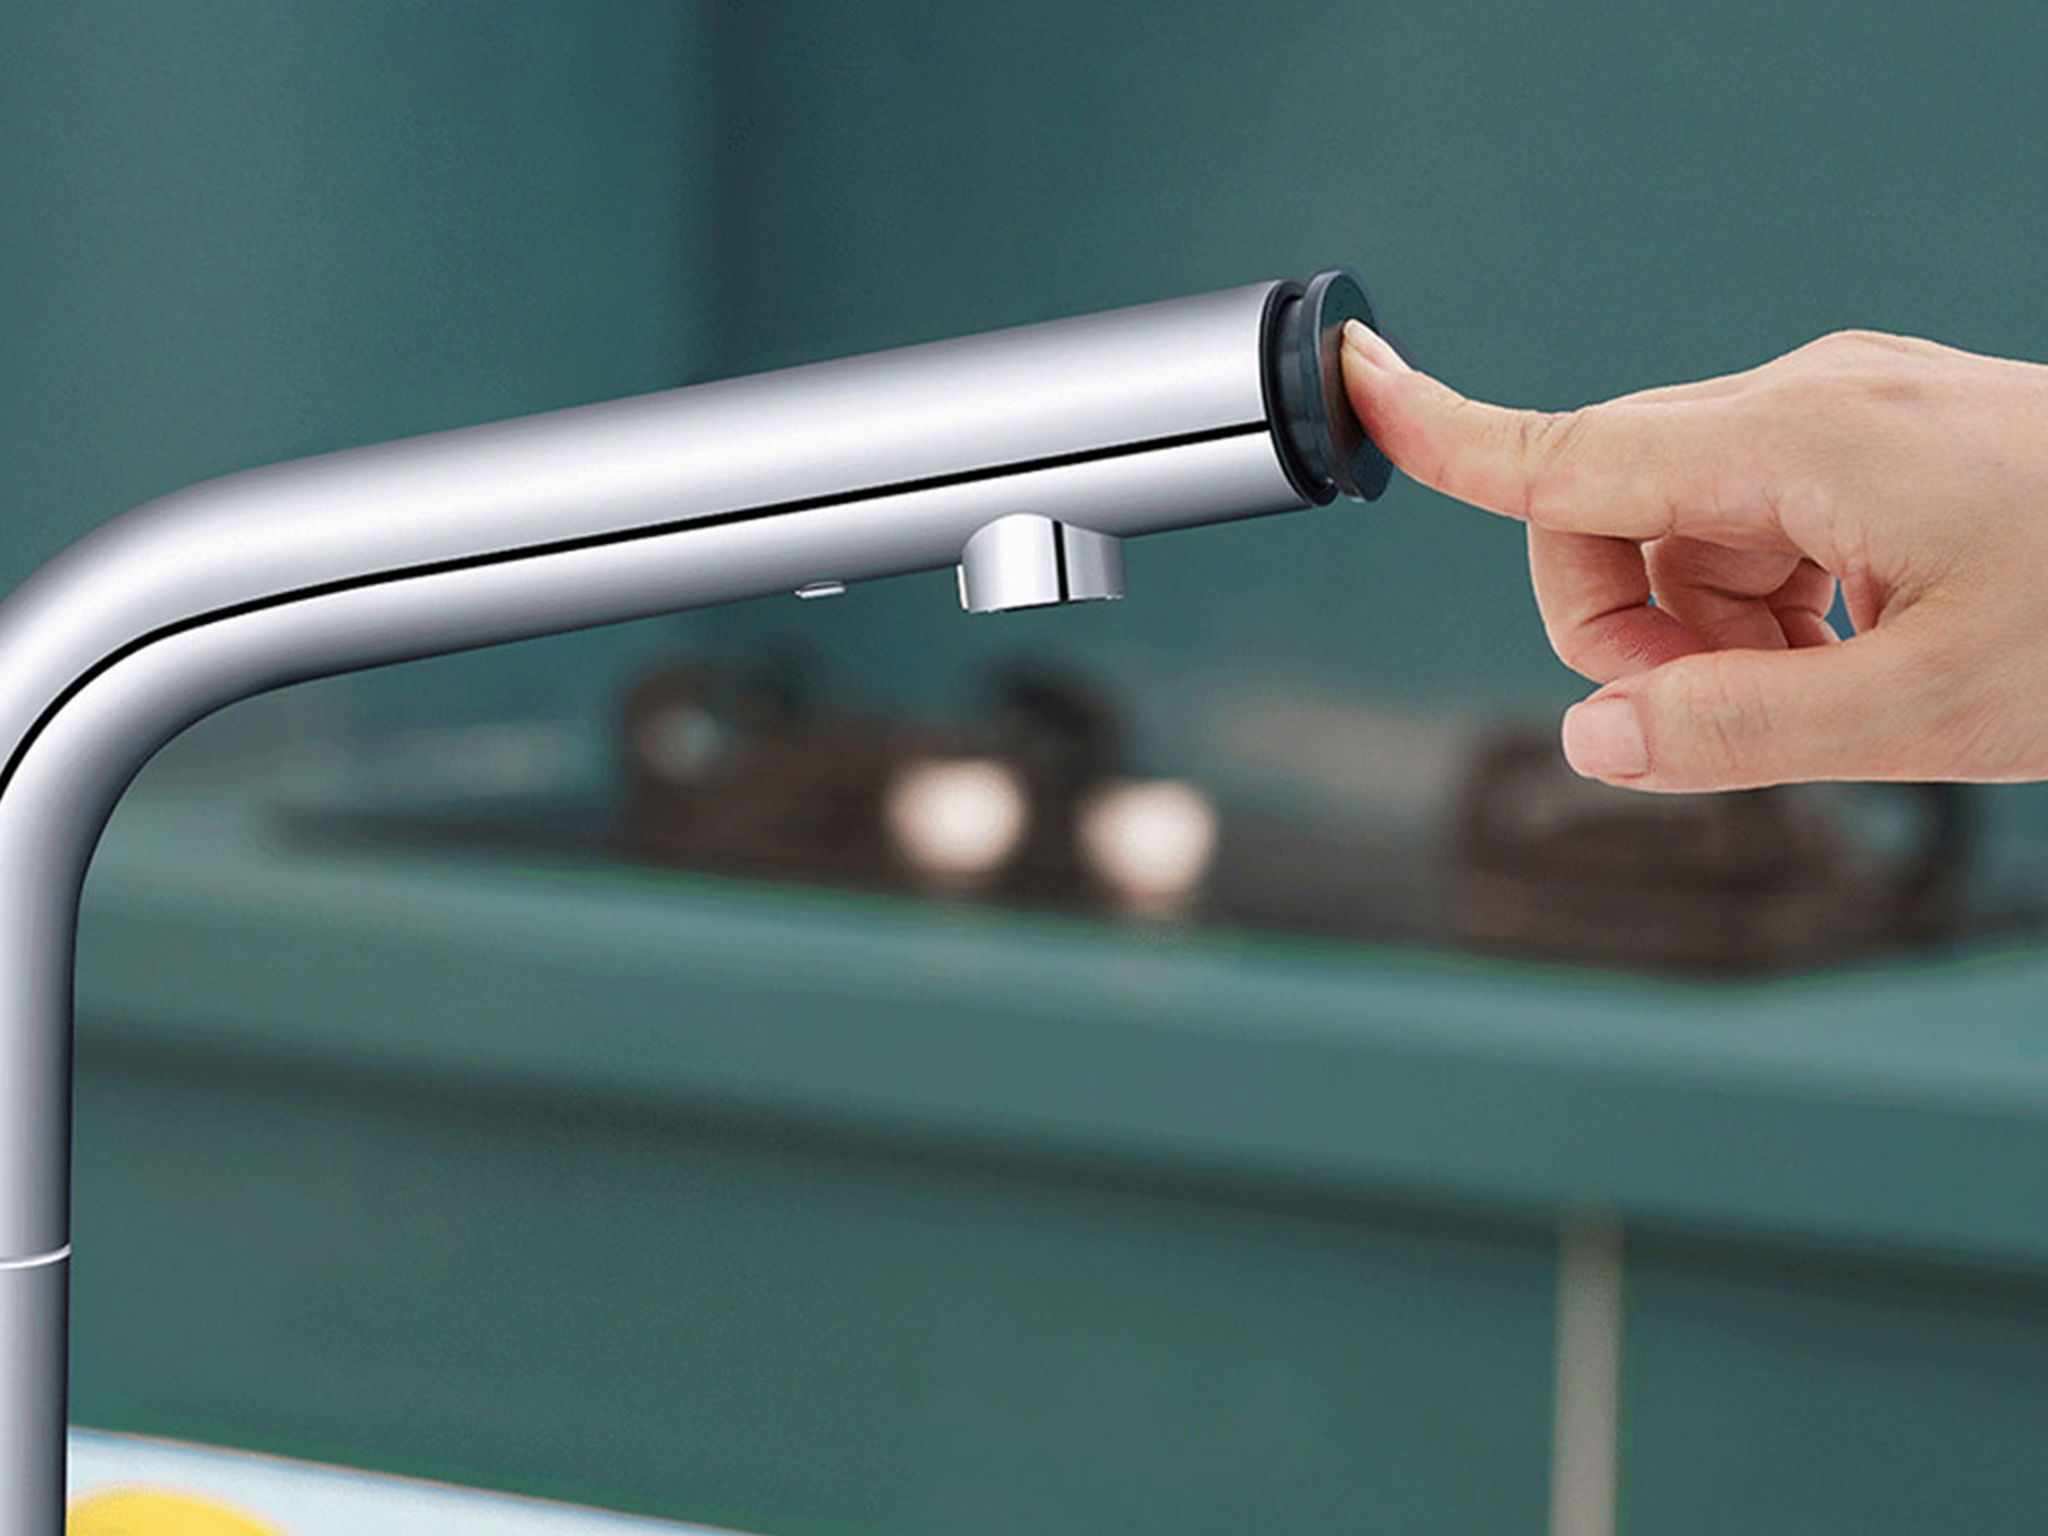 One-button water stop kitchen faucet